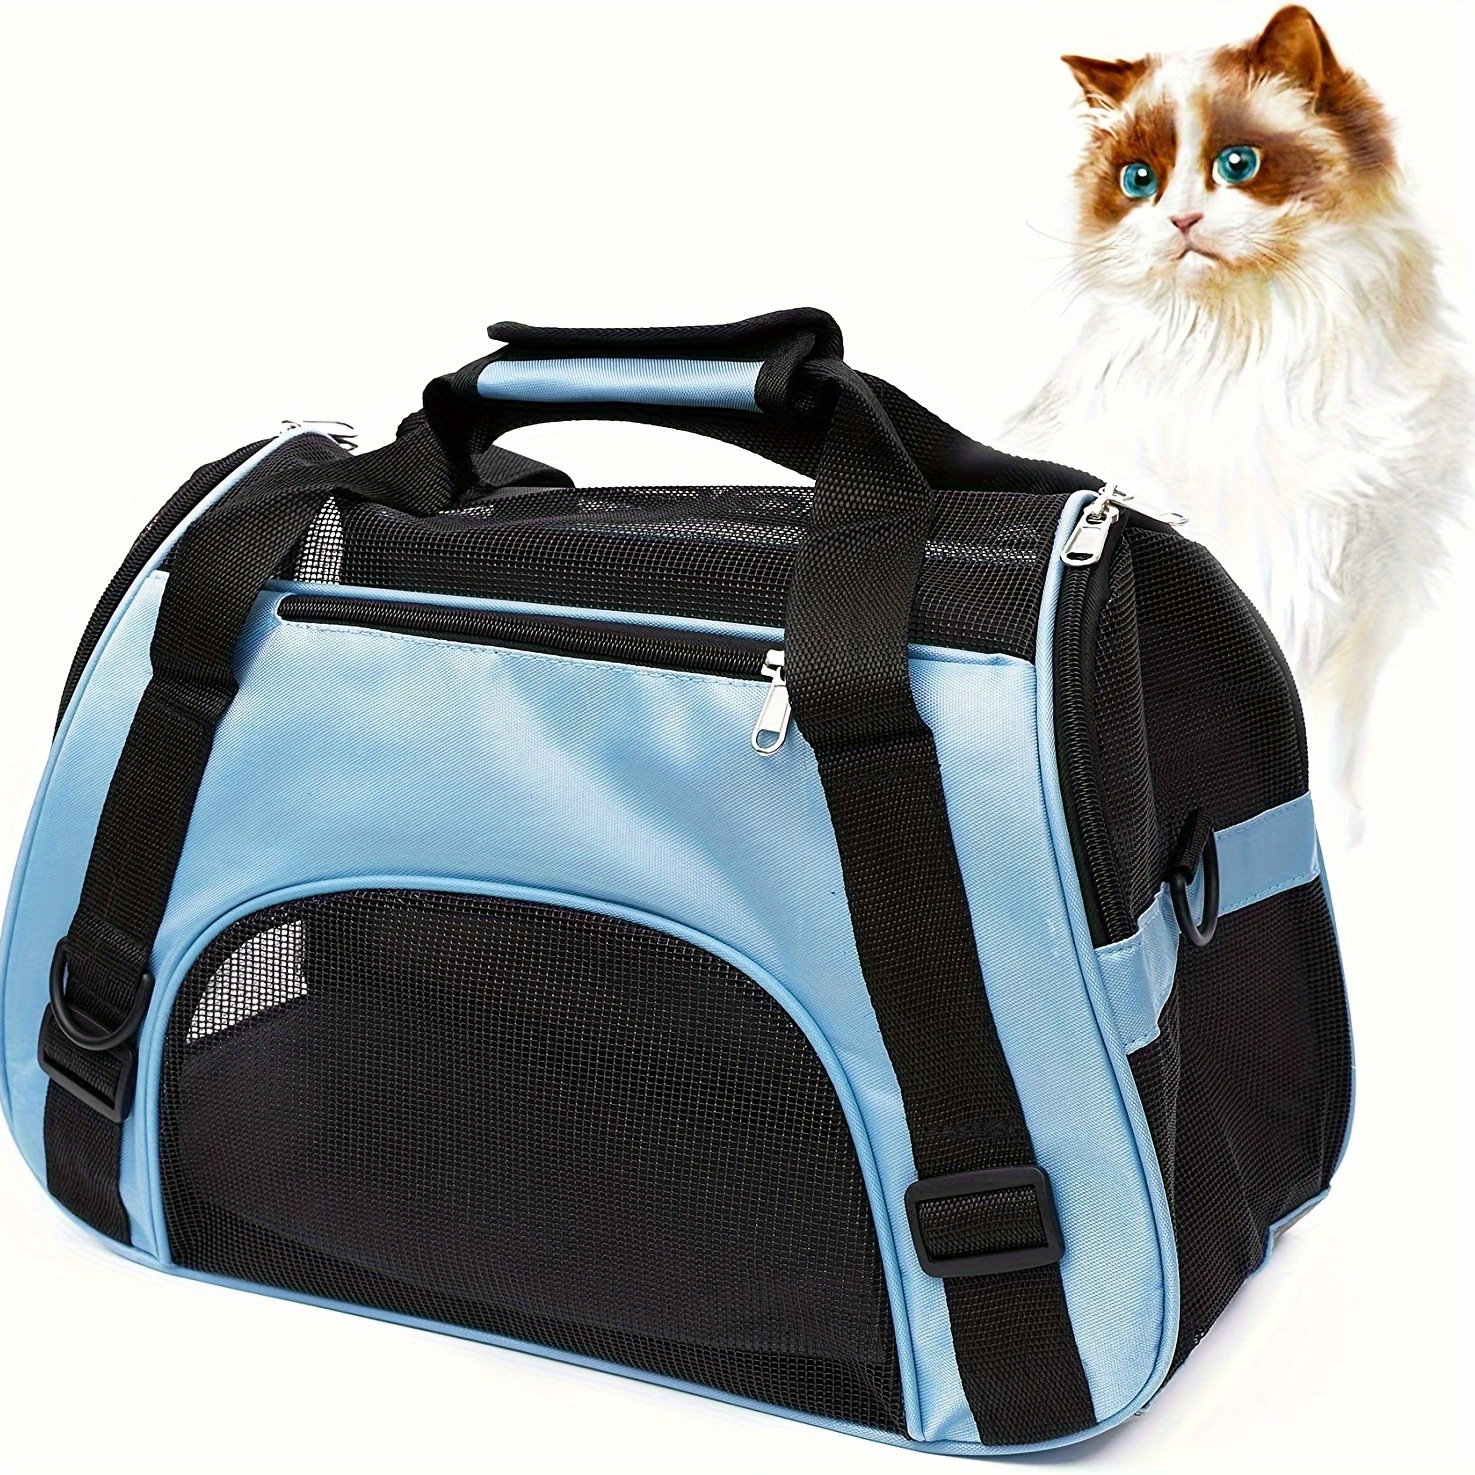 

Portable Pet Carrier For Cats And Dogs - Airline Approved, Foldable And Convenient - Ideal For Travel And Outdoor Activities